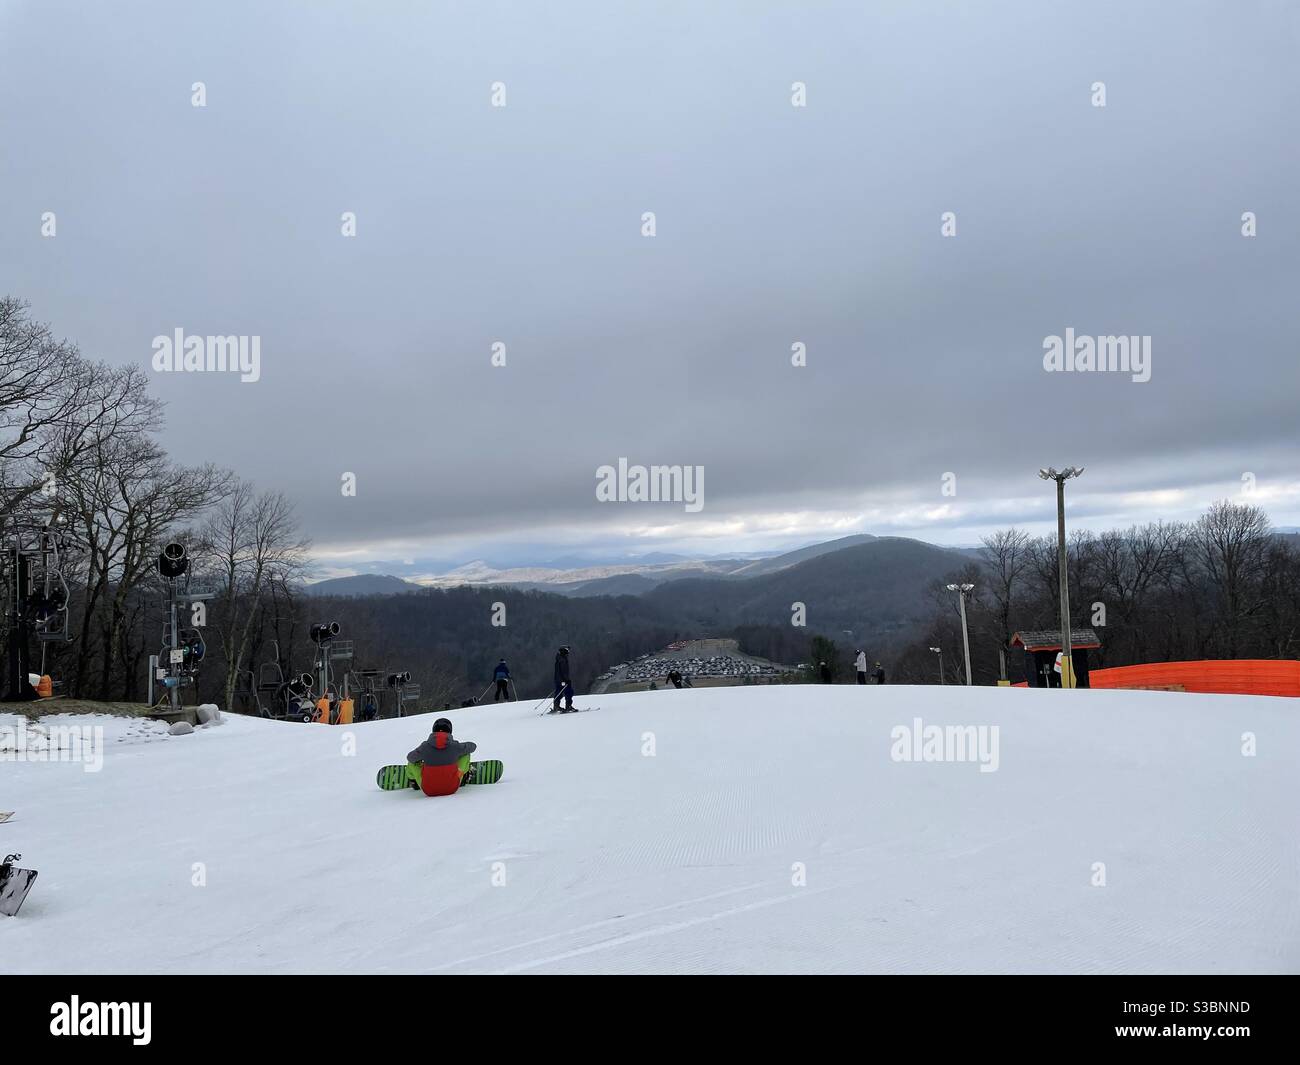 Opening weekend at Appalachian Ski Mountain in Boone, NC in December 2020. Stock Photo